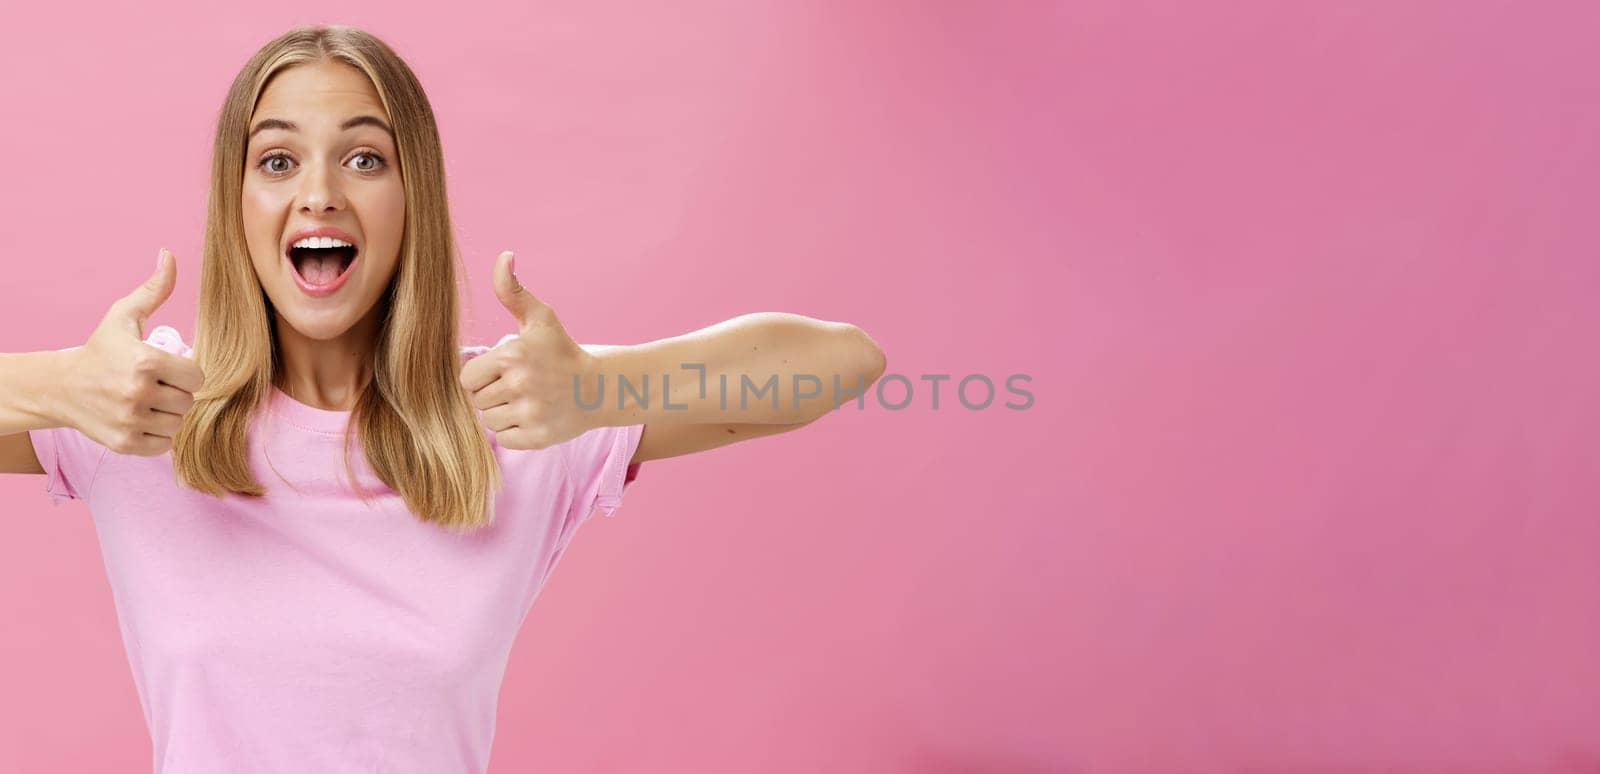 Supportive girlfriend cheering for favorite player showing thumbs up with happy positive smile giving approval and showing she likes perfect idea posing amused and enthusiastic against pink background. Lifestyle.